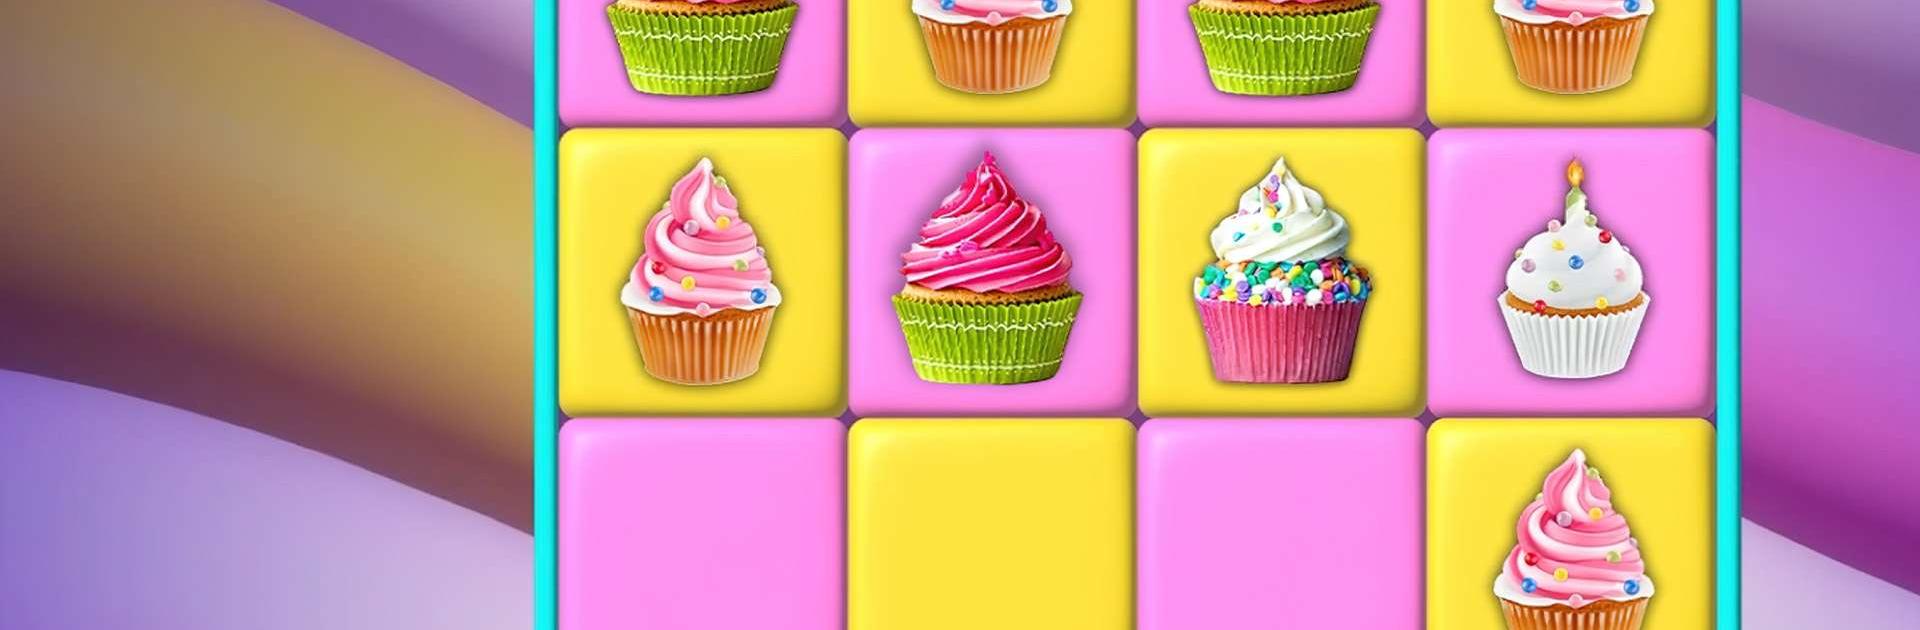 Play 2048 Cupcakes Online